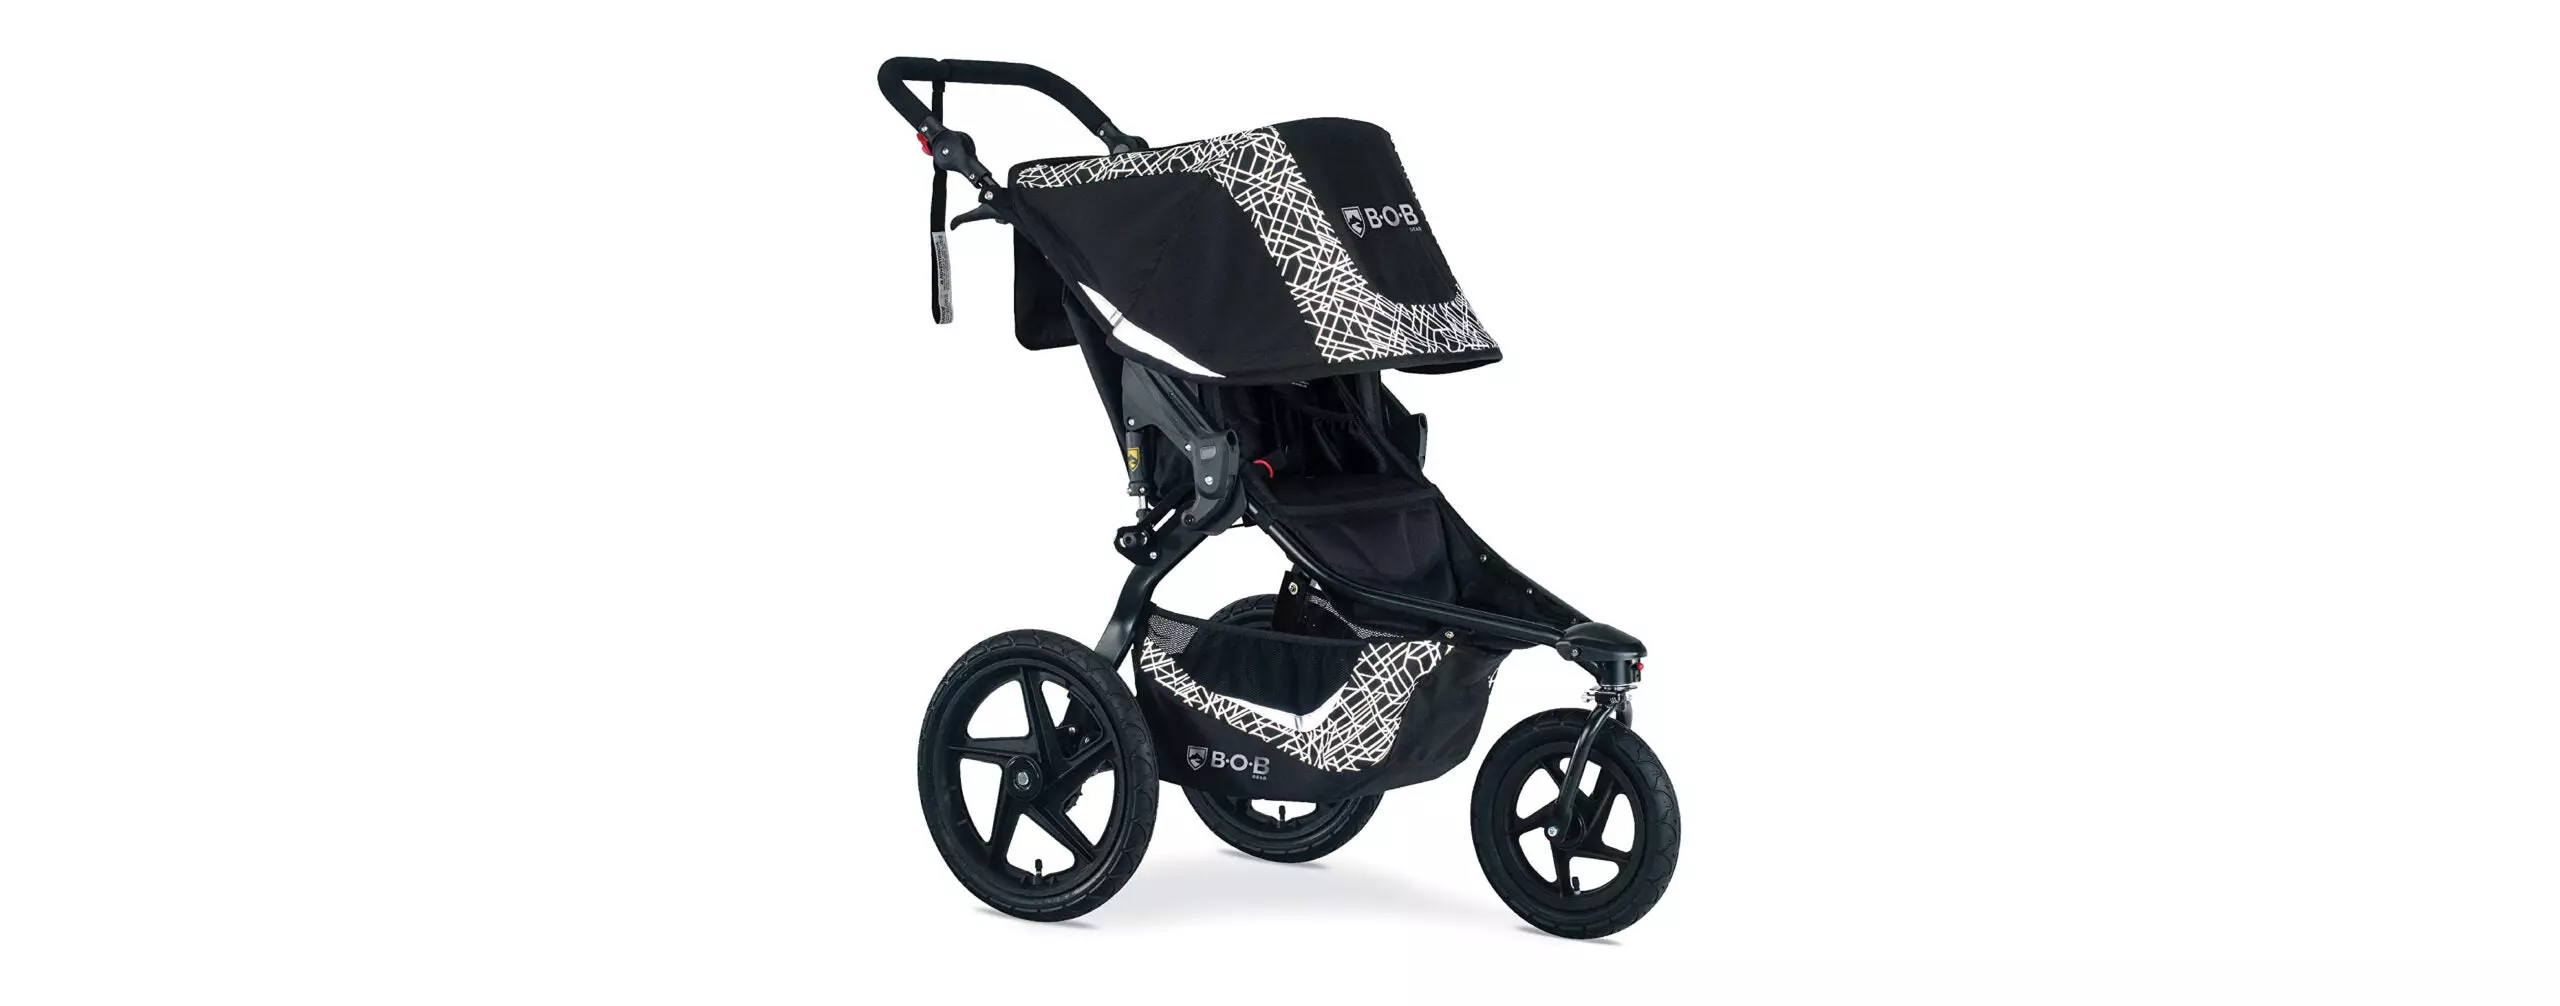 The Best Jogger Strollers (Review and Buying Guide) in 2022